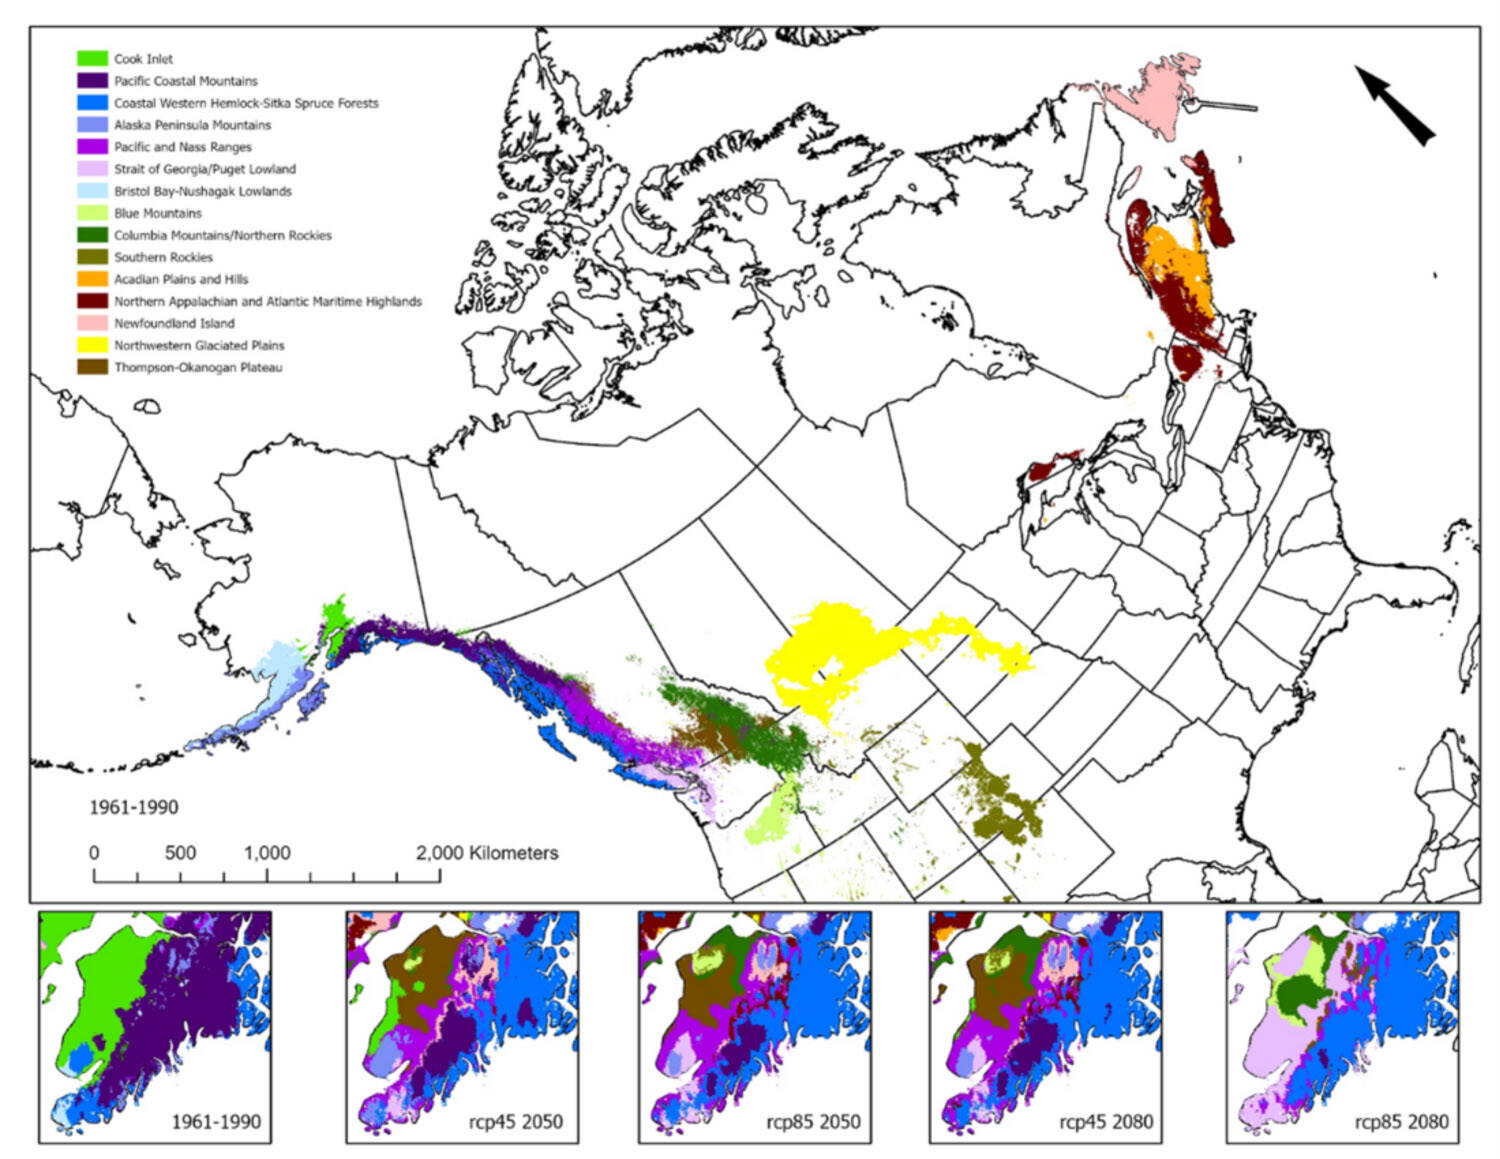 Ecoregions that are forecast to align with the future climate of the Kenai National Wildlife Refuge in 2050 and 2080 under high (rcp85) and low (rcp45) emission scenarios. The western Kenai continues to be associated with temperate rainforests to the south. The boreal lowlands can be associated with a variety of ecoregions across North America. Data reference: Stralberg, D. 2019. Velocity-based macrorefugia for North American ecoregions. Zenodo. http://doi.org/10.5281/zenodo.2579337.